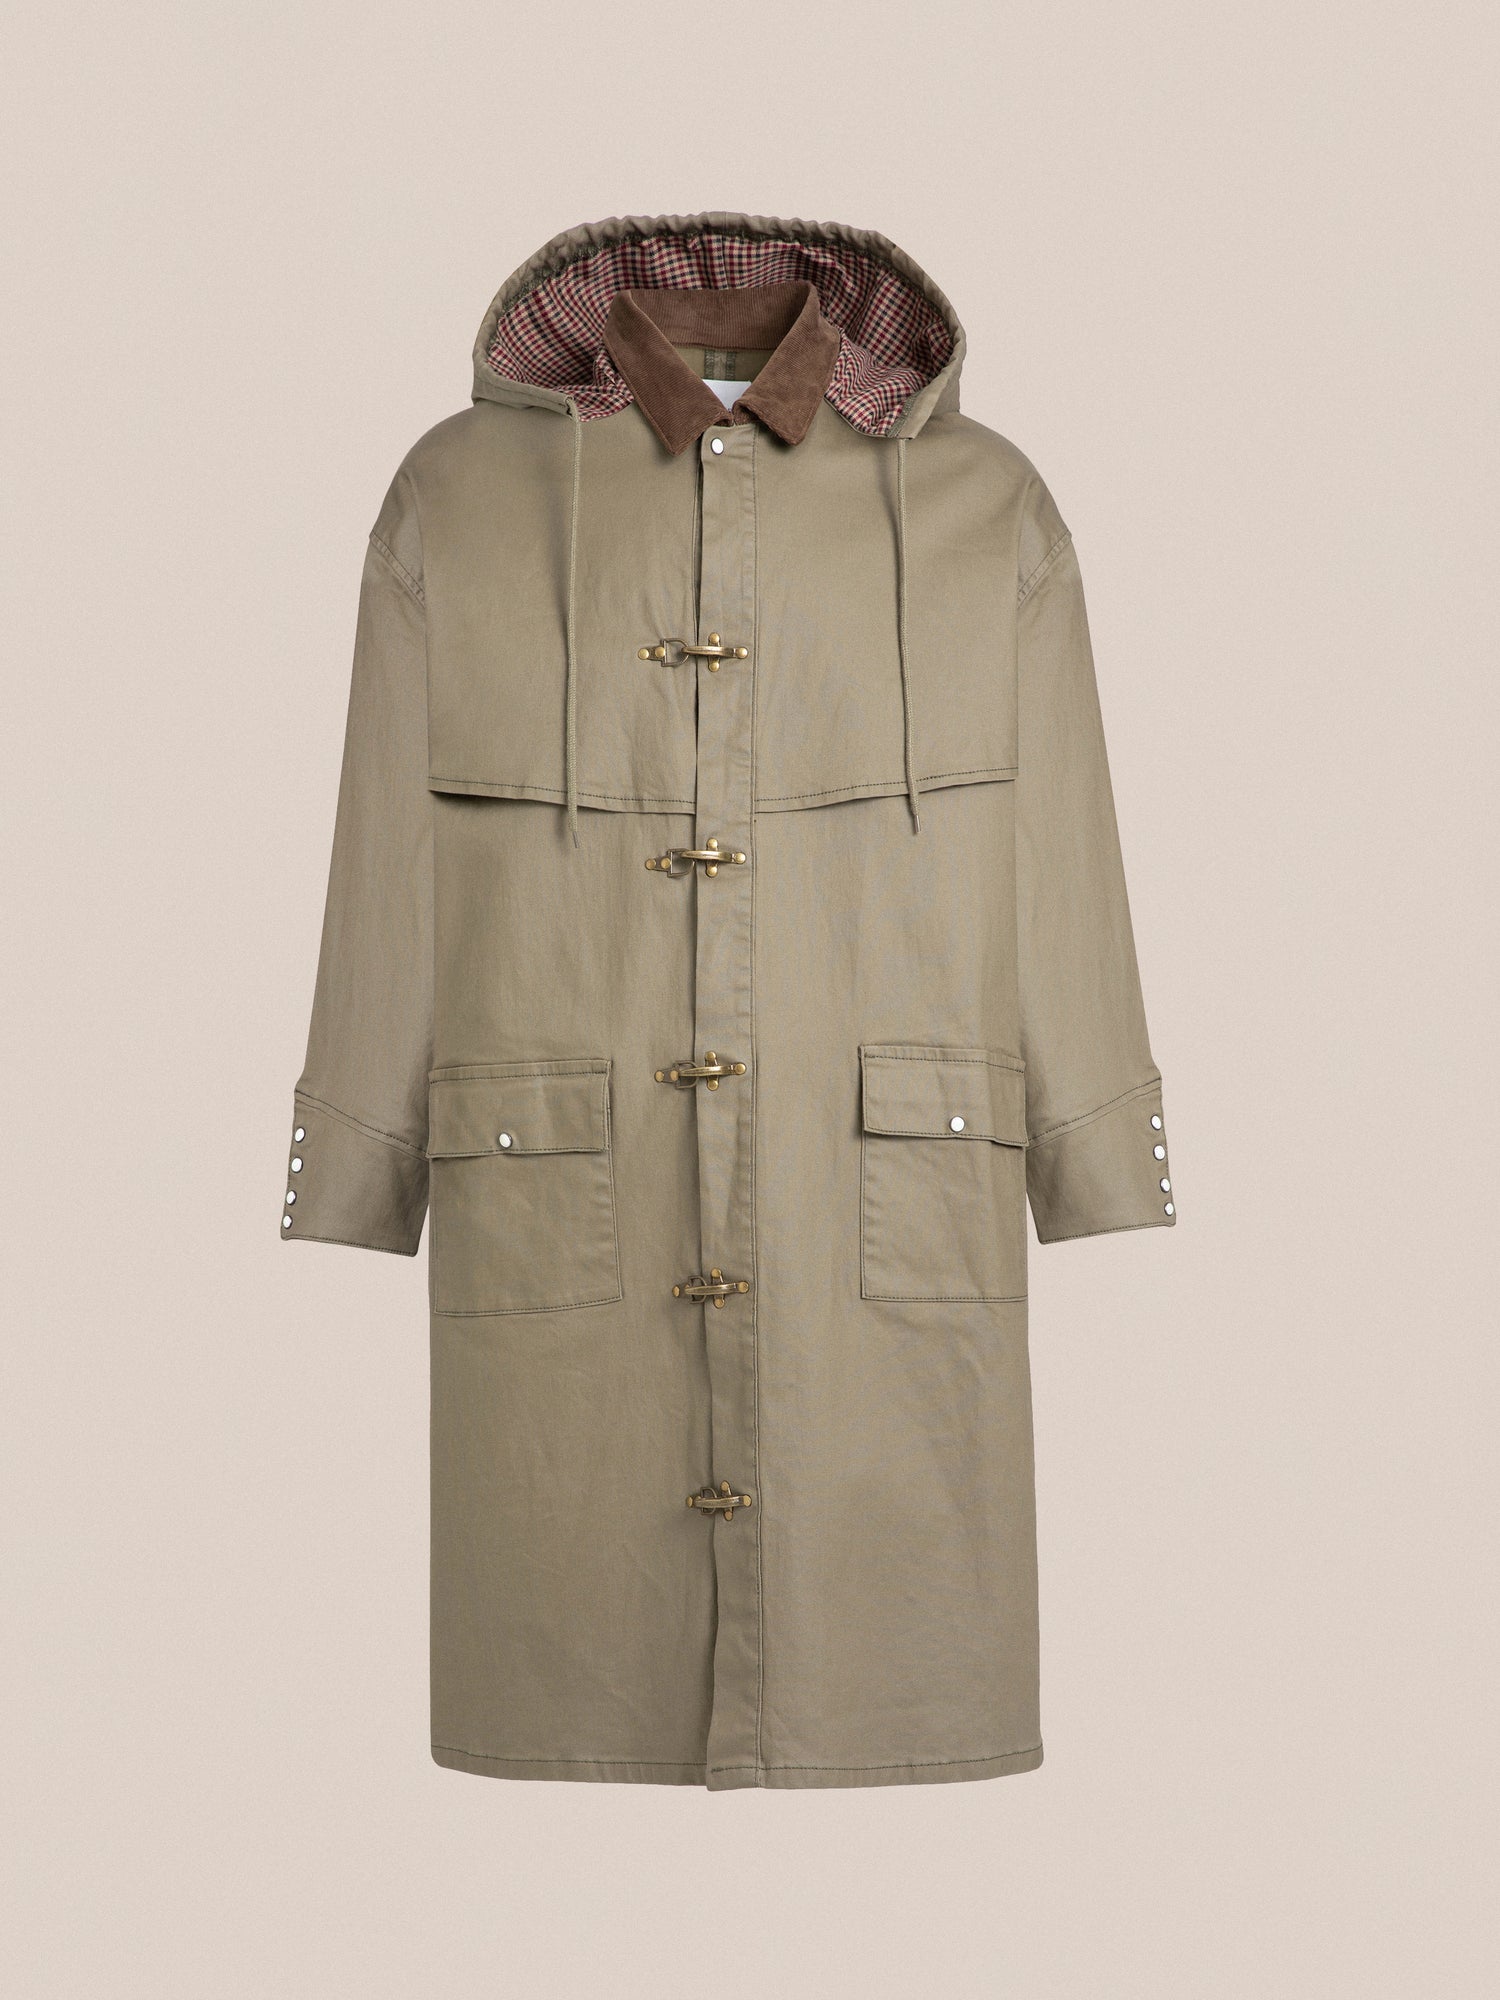 A Prairie Buckle Coat in beige with a hooded hood, featuring fireman clasps by Found.